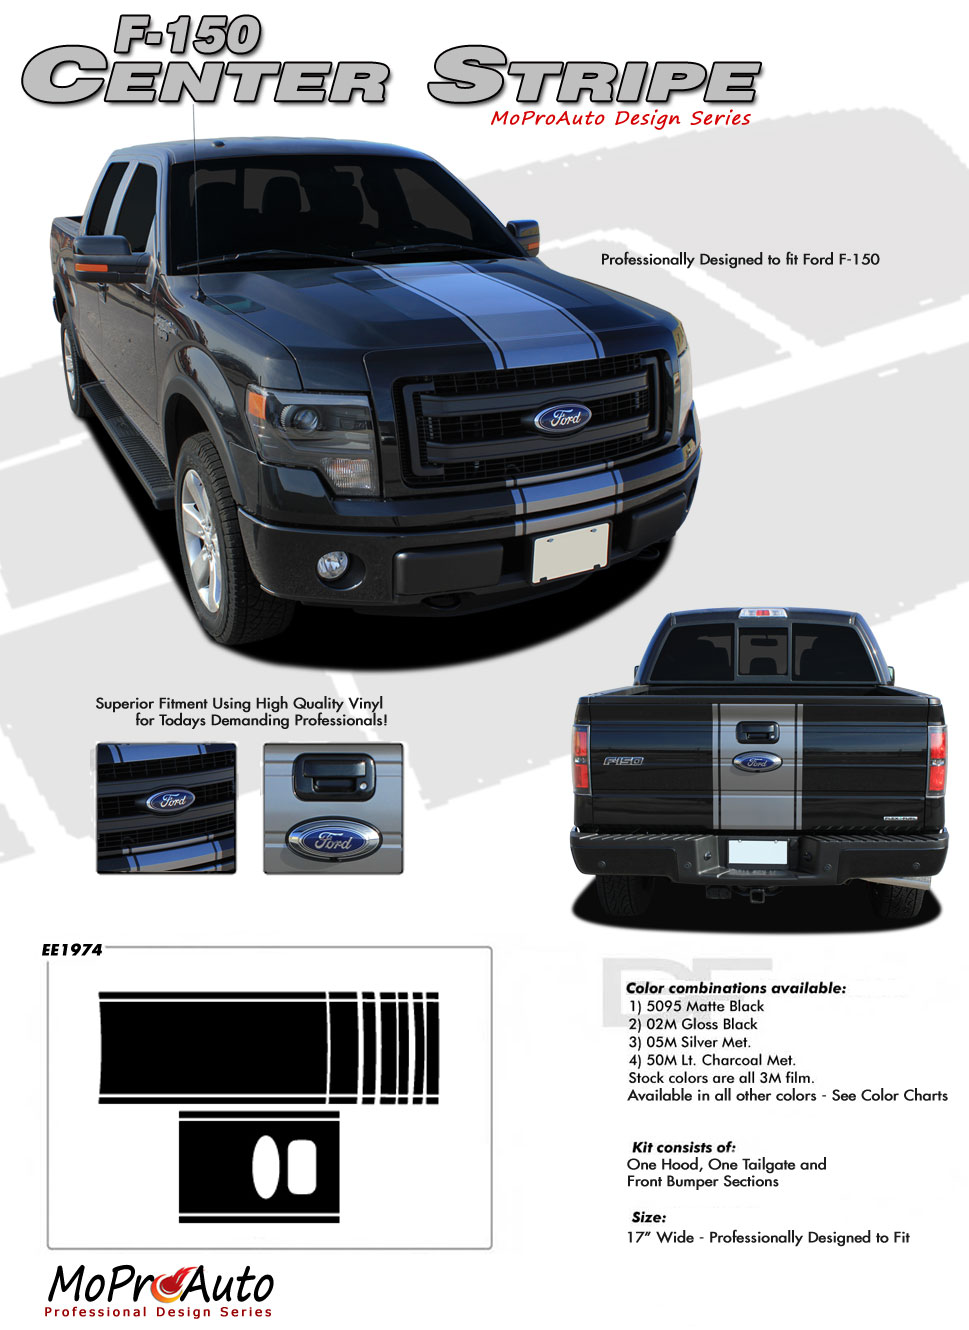 Ford F-Series F-150 - MoProAuto Pro Design Series Vinyl Graphics and Decals Kit